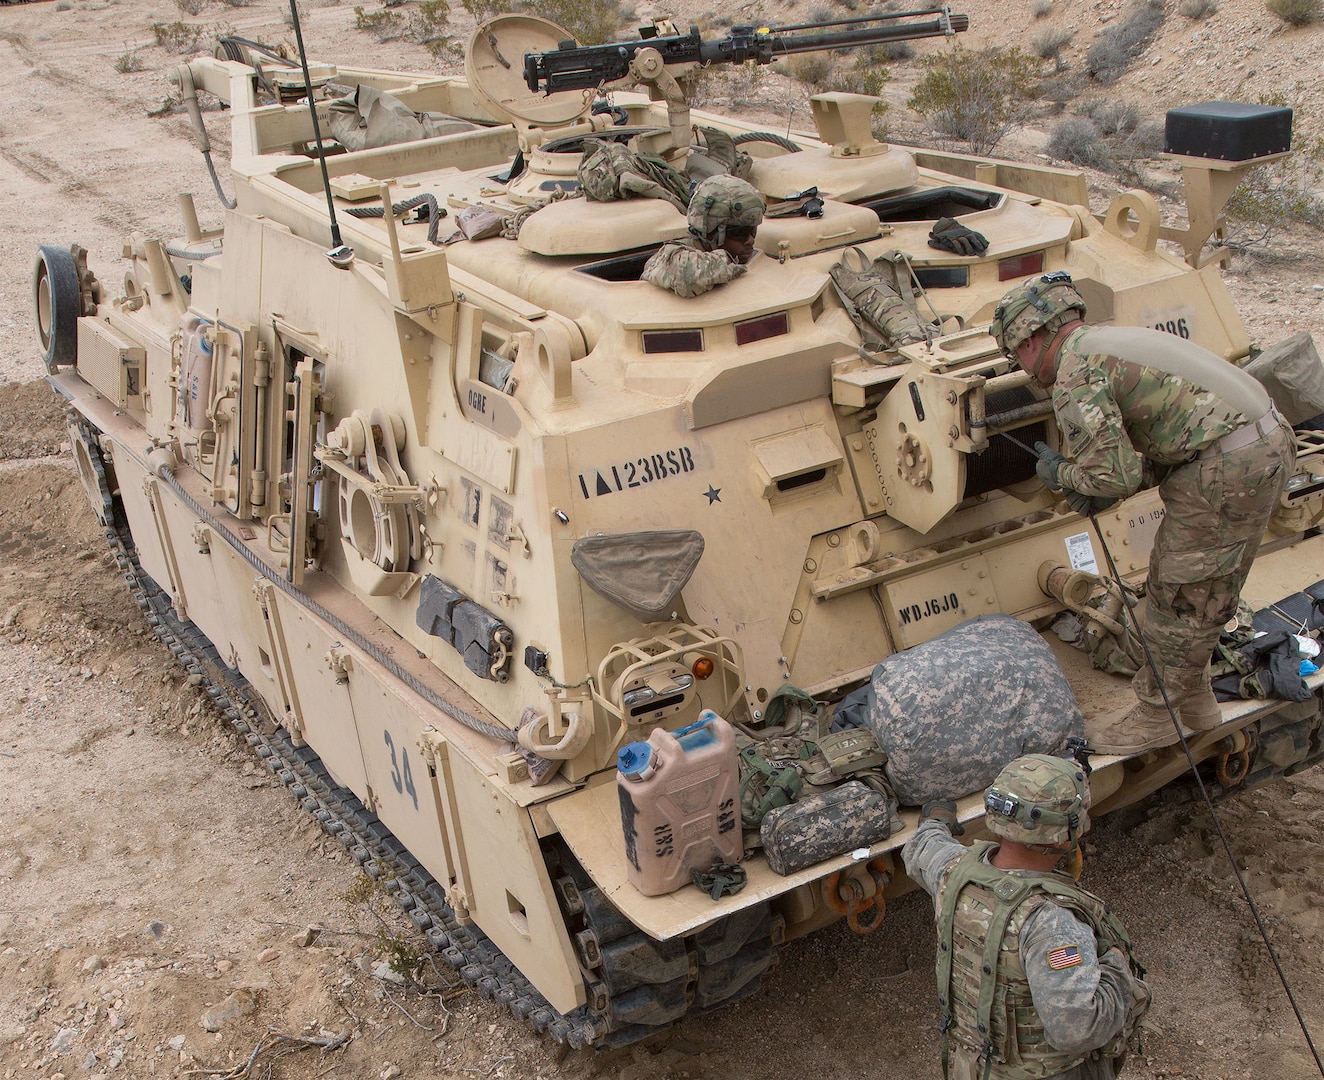 Army soldiers working on a large tan track wheeled vehicle in the desert.